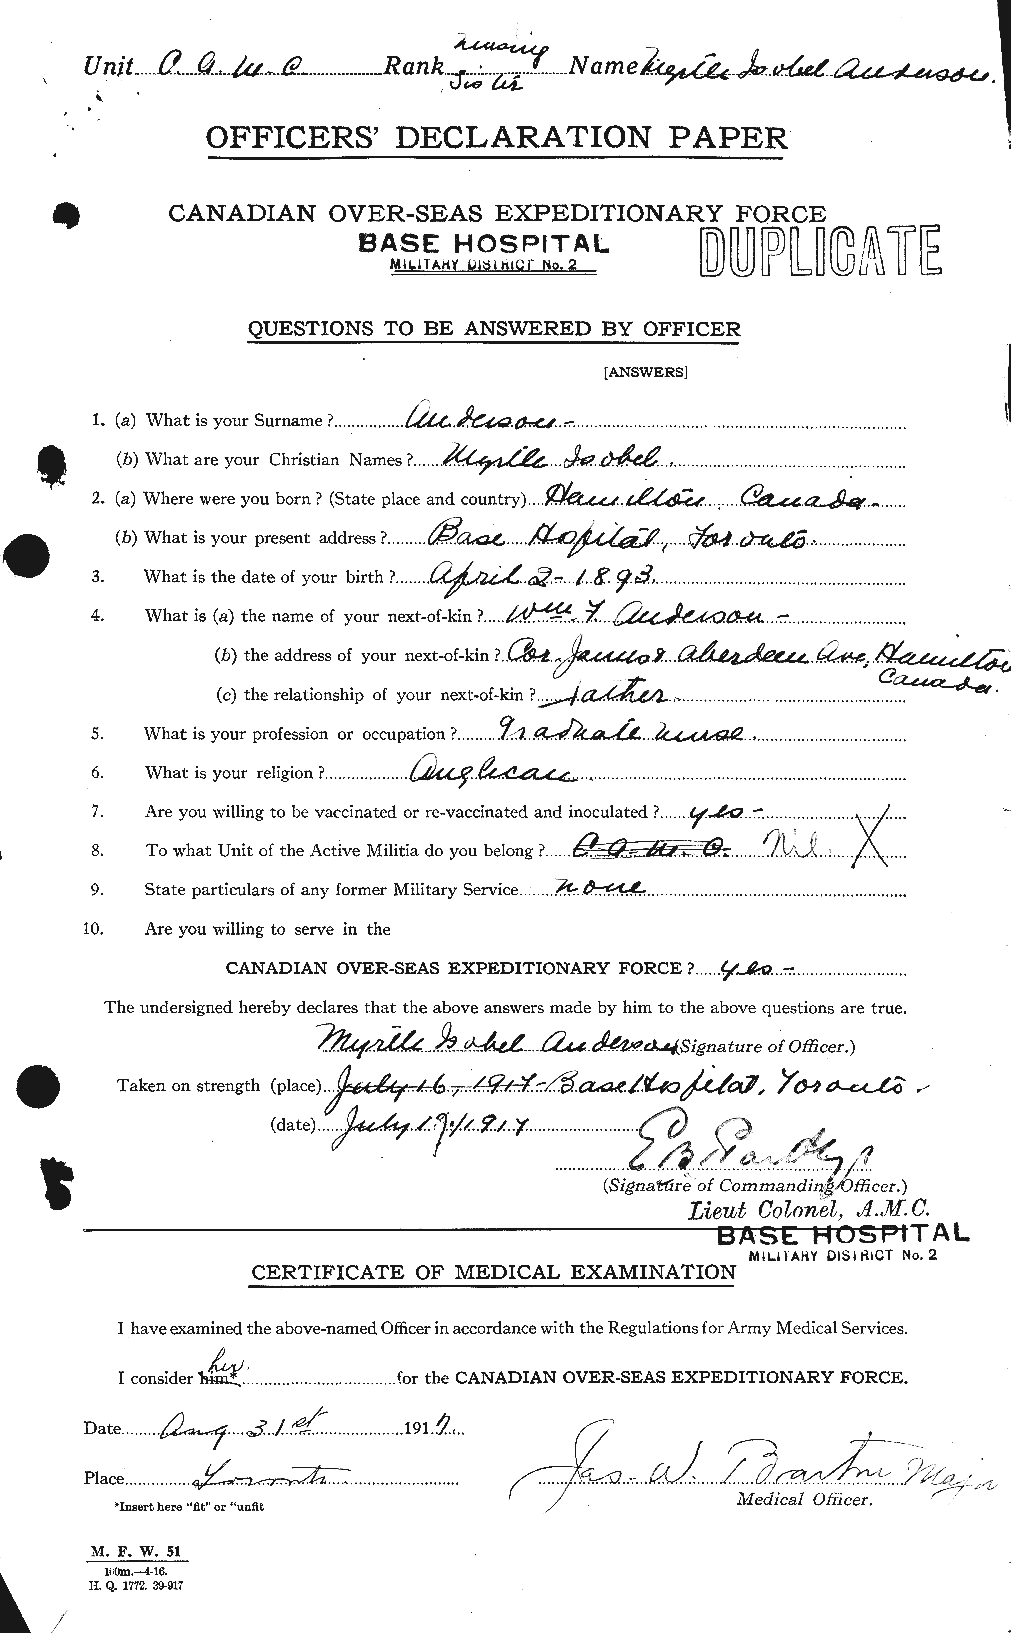 Personnel Records of the First World War - CEF 207440a